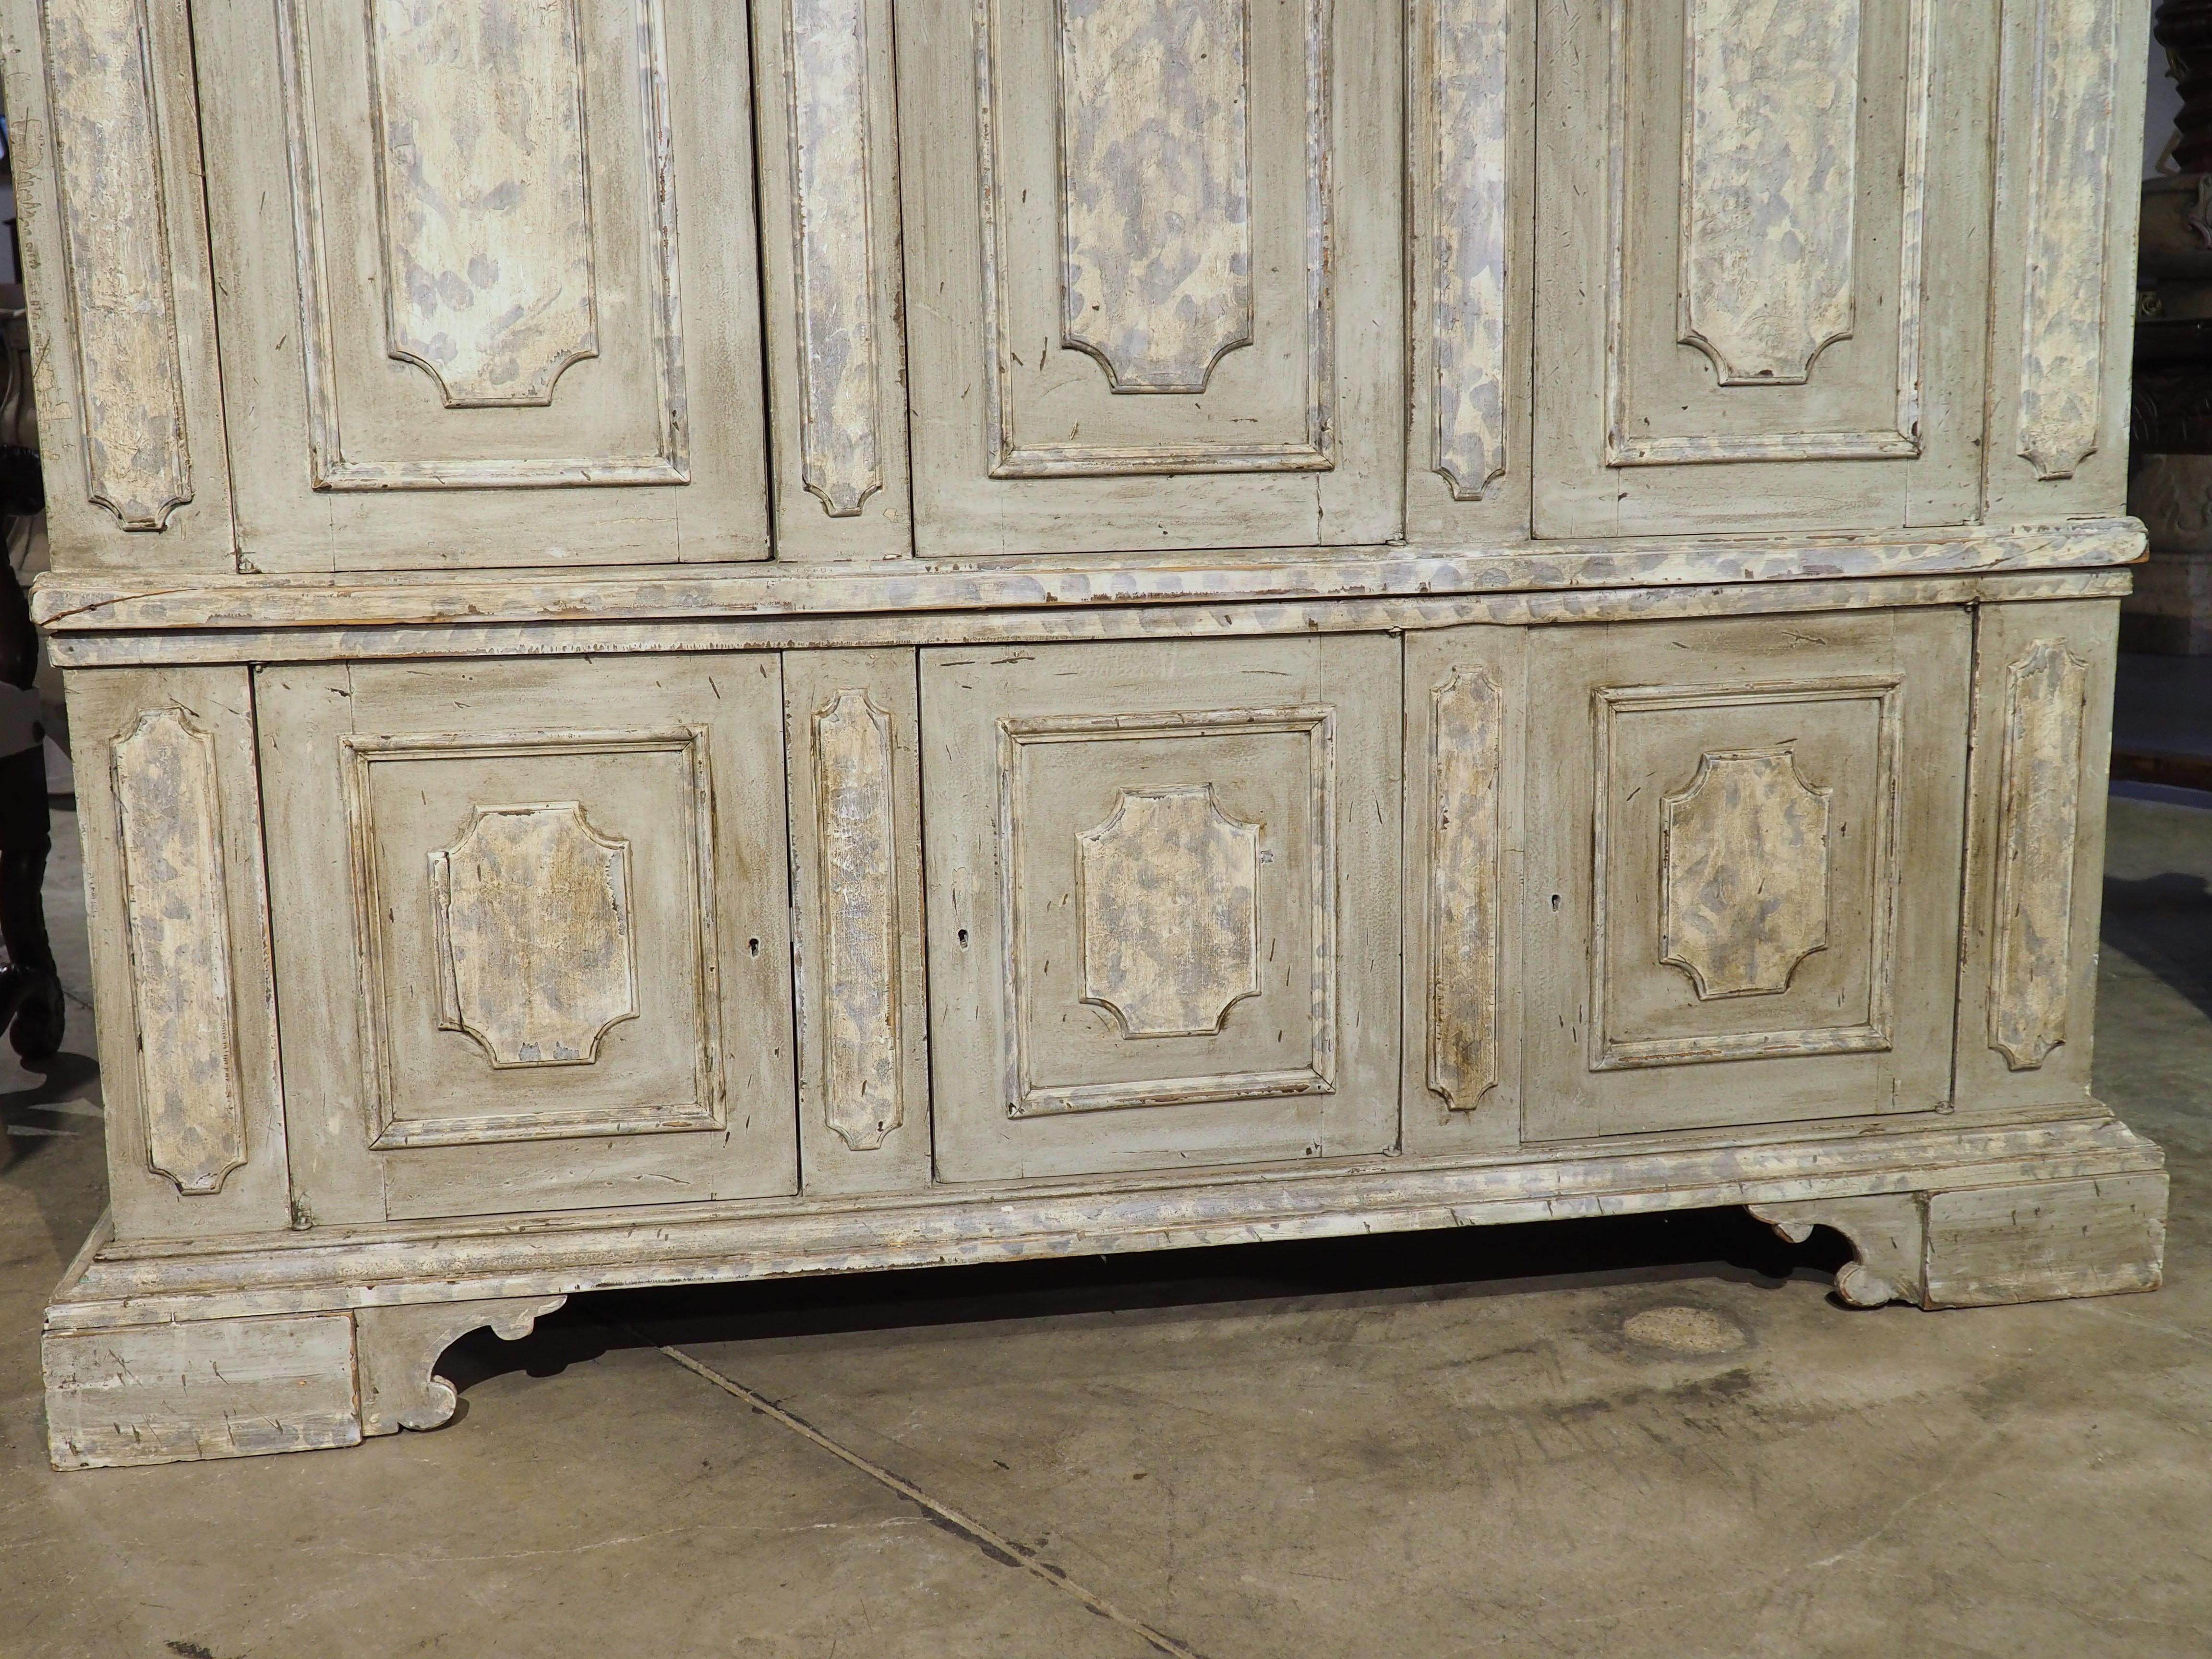 Known as an armadio, this Italian wardrobe has a painted faux finish consisting of cream and blue striations over a gray background. The upper body is topped by a crenelated crown beneath several ogee moldings. All three doors feature rectangular